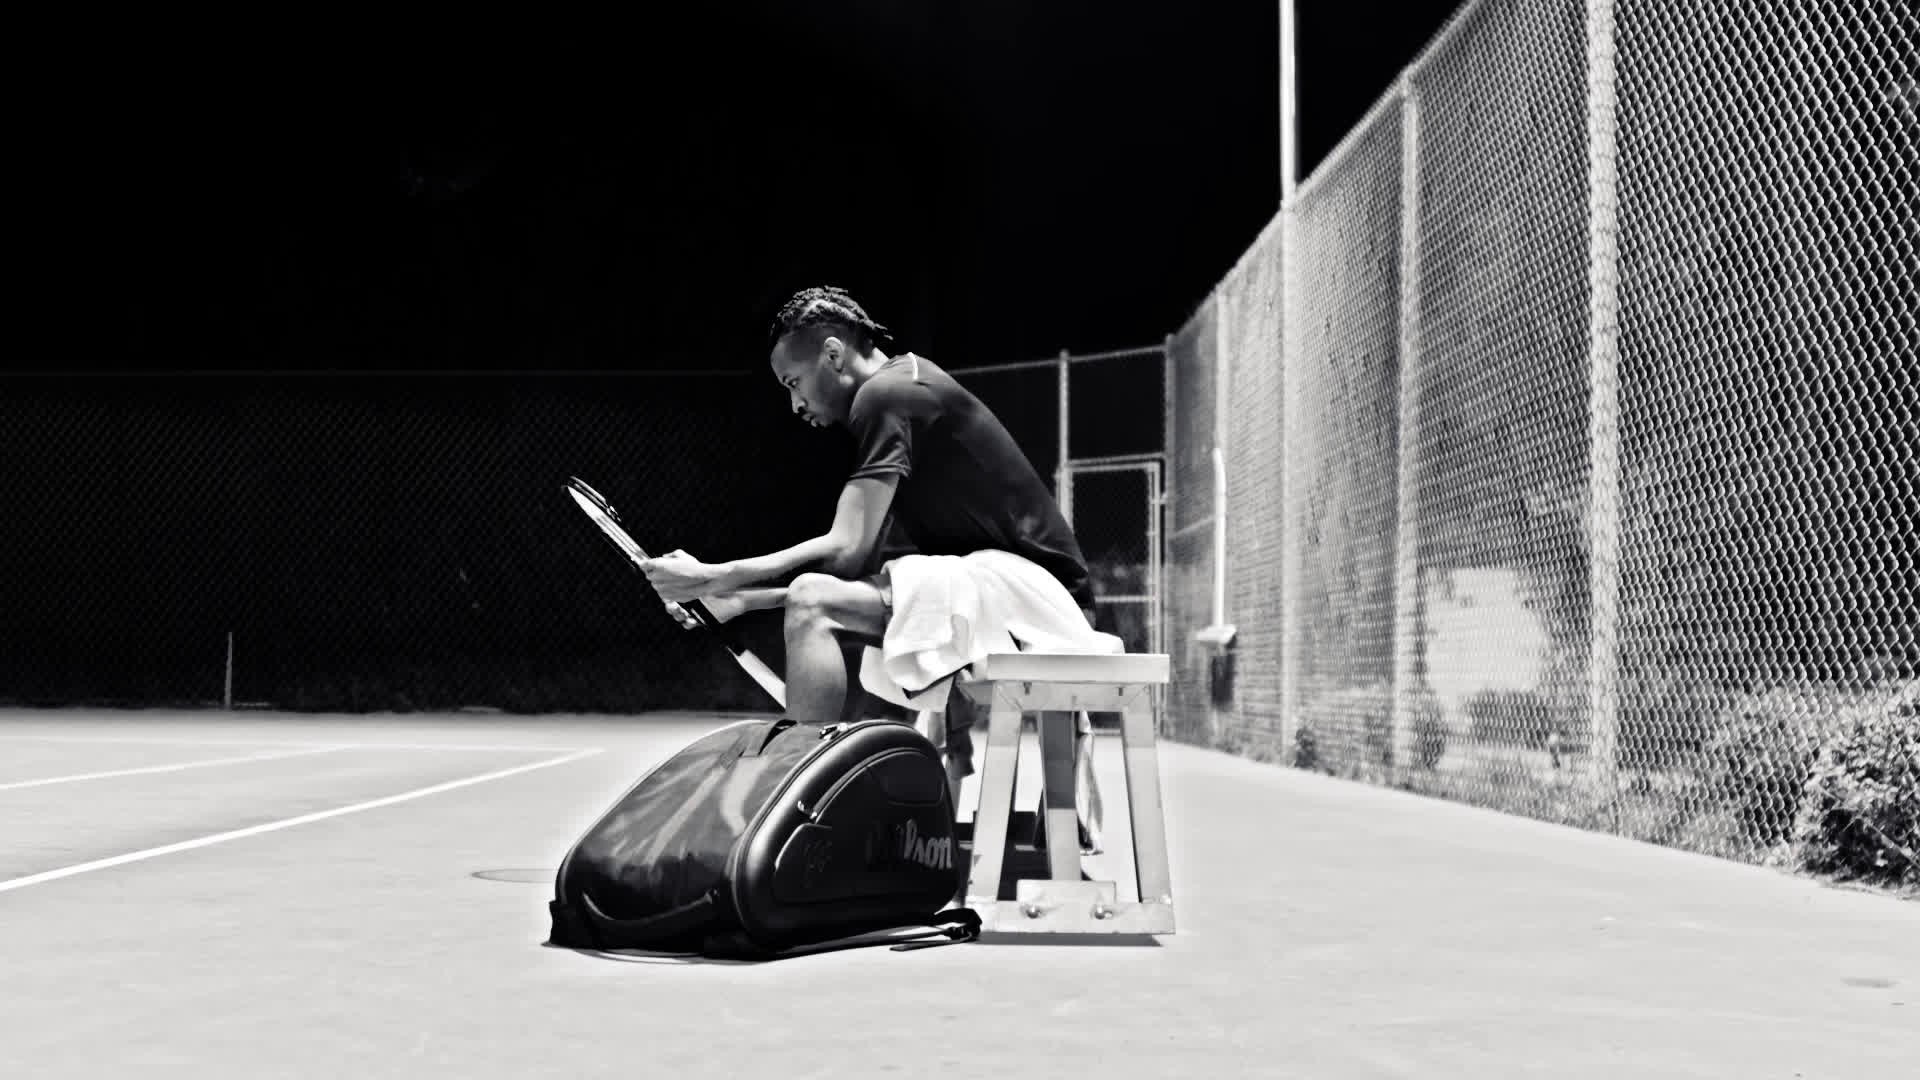 From Federer: Editing